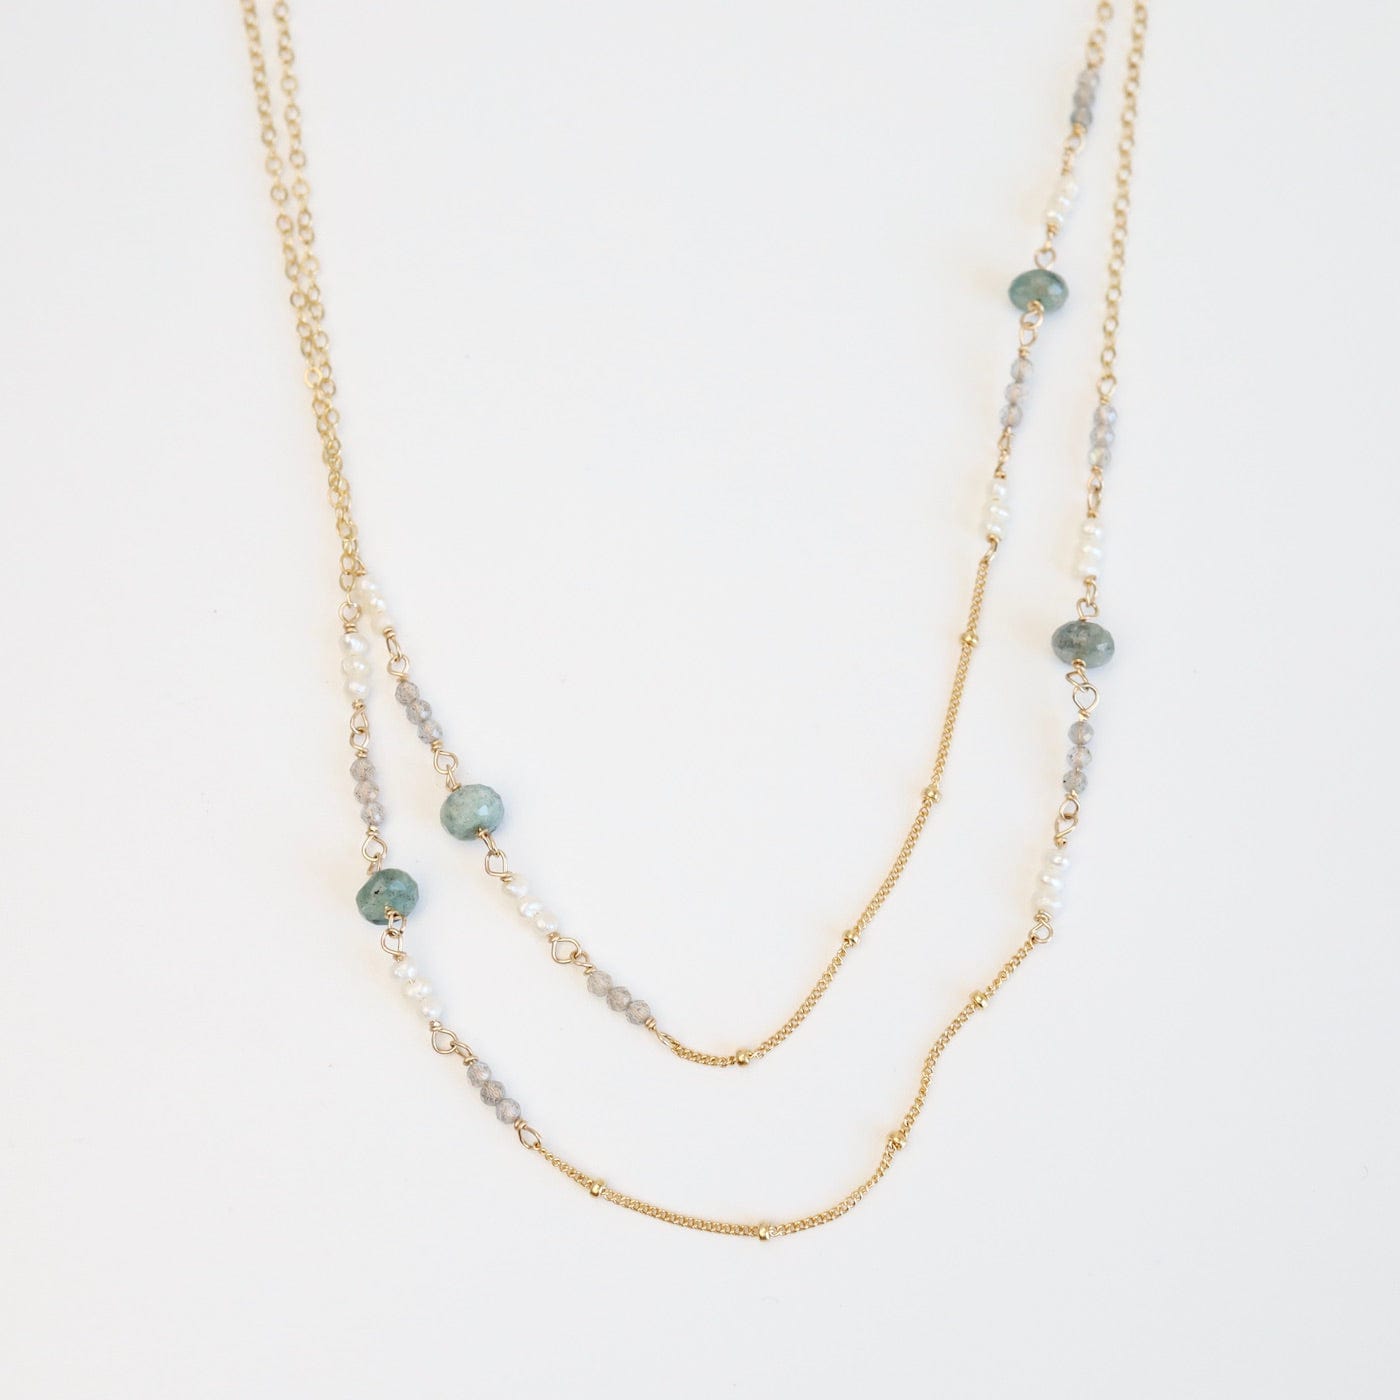 NKL-GF 36" Mixed Gold Filled Chain with Stations of Aquamarine Necklace